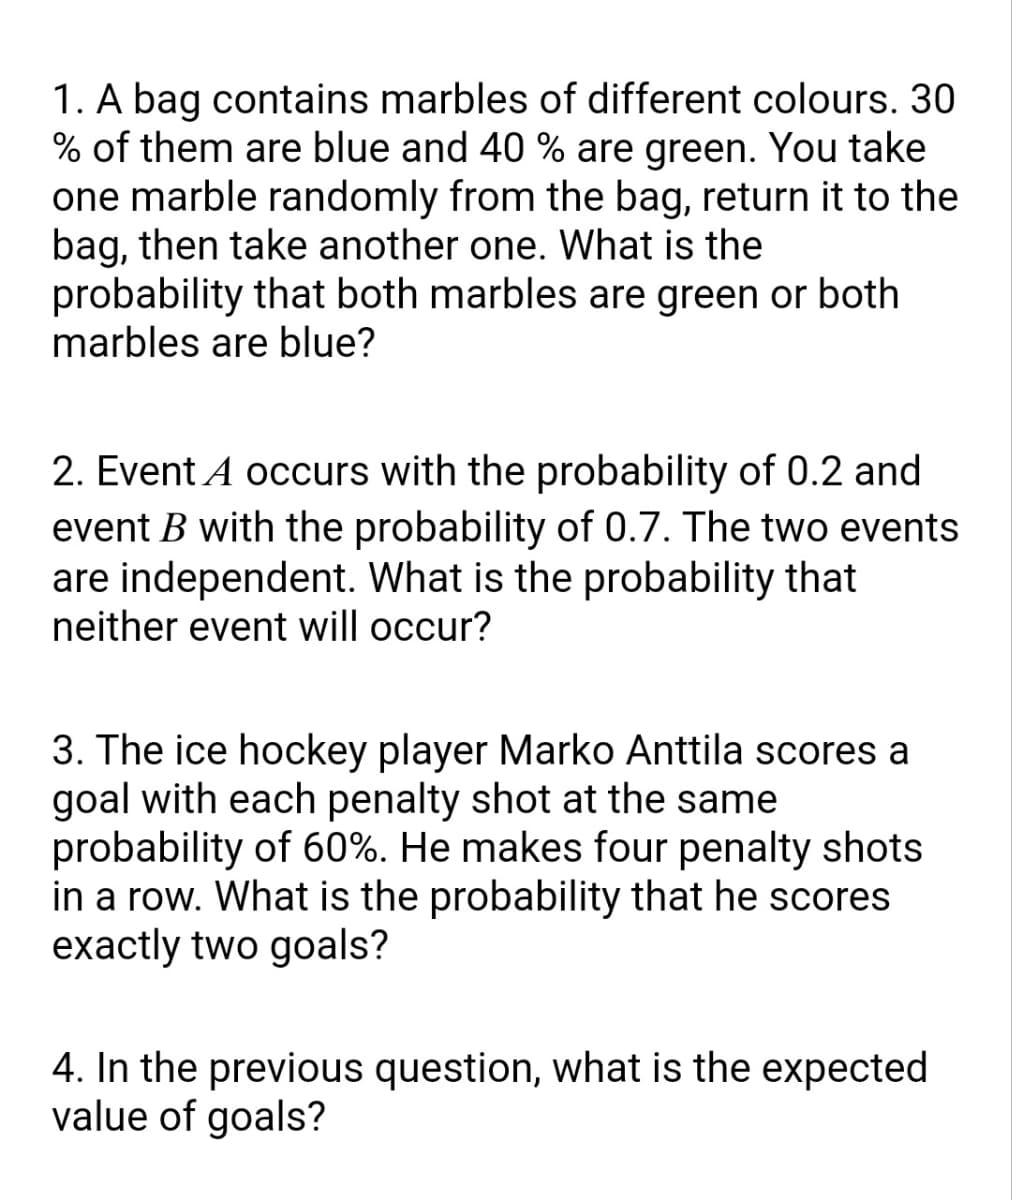 1. A bag contains marbles of different colours. 30
% of them are blue and 40 % are green. You take
one marble randomly from the bag, return it to the
bag, then take another one. What is the
probability that both marbles are green or both
marbles are blue?
2. Event A occurs with the probability of 0.2 and
event B with the probability of 0.7. The two events
are independent. What is the probability that
neither event will occur?
3. The ice hockey player Marko Anttila scores a
goal with each penalty shot at the same
probability of 60%. He makes four penalty shots
in a row. What is the probability that he scores
exactly two goals?
4. In the previous question, what is the expected
value of goals?